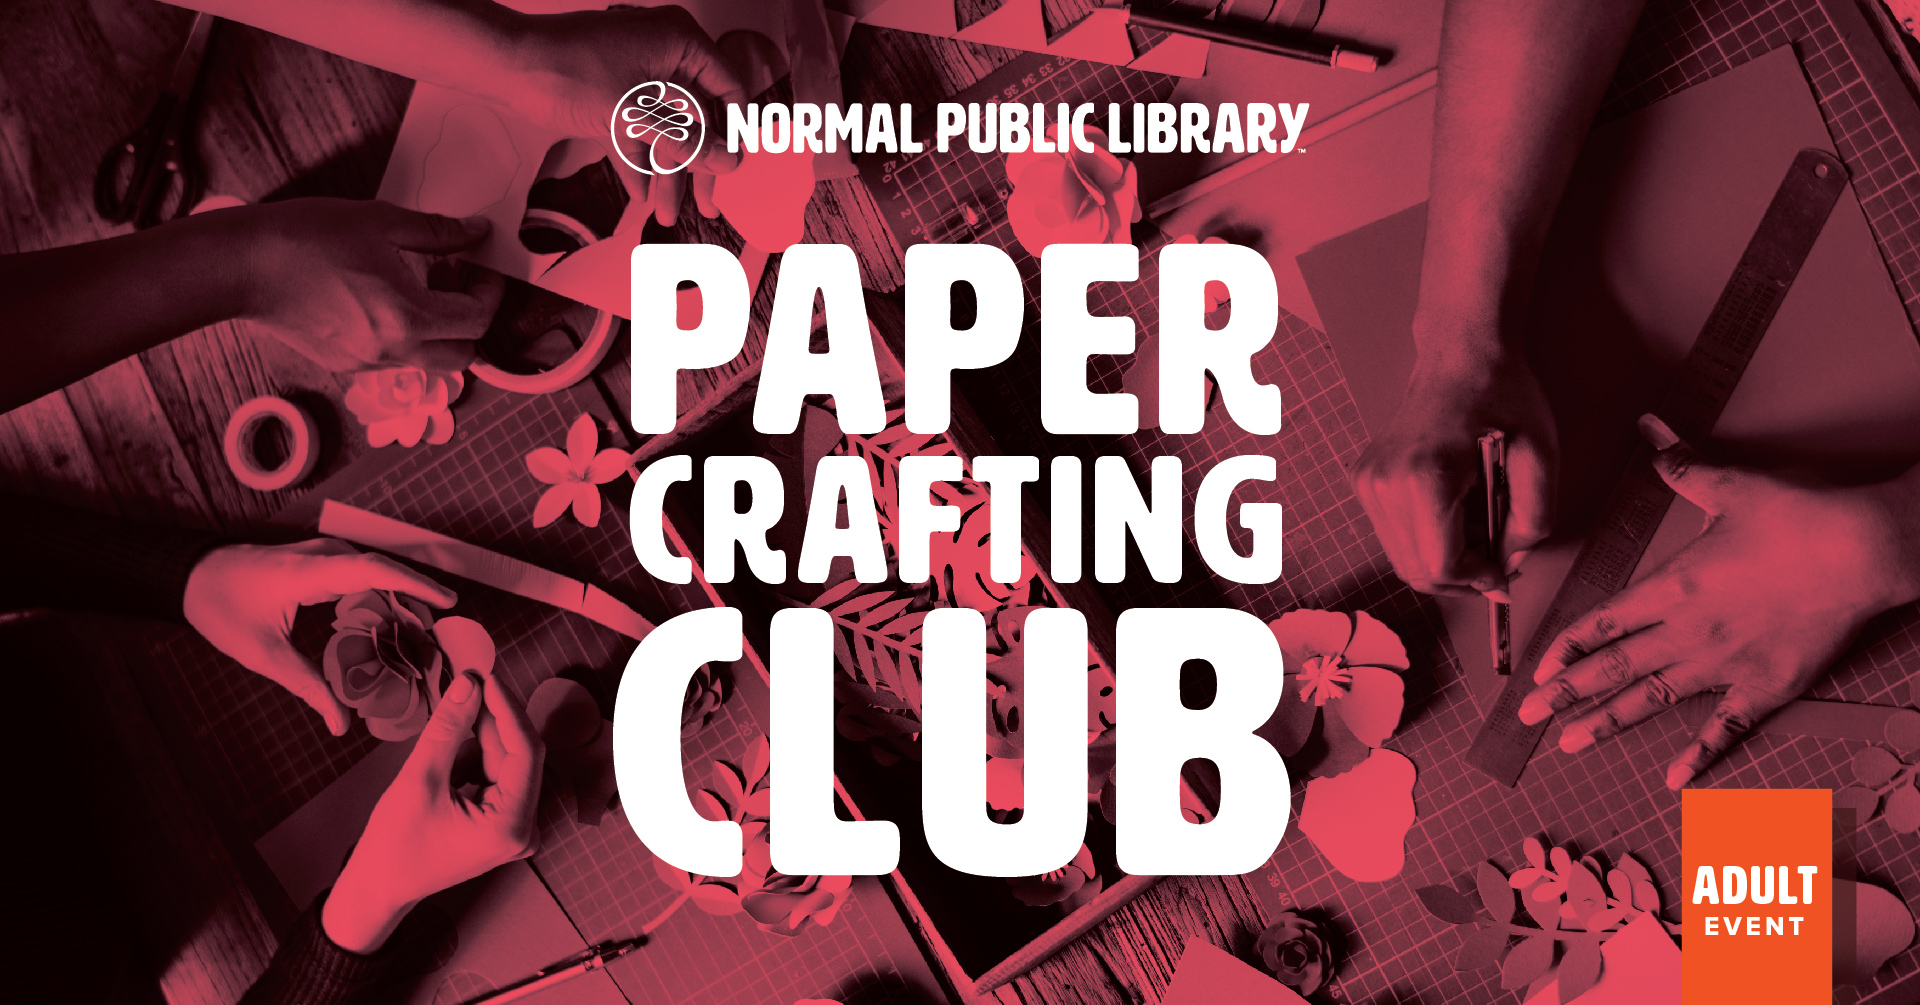 Image for Paper Crafting Club.